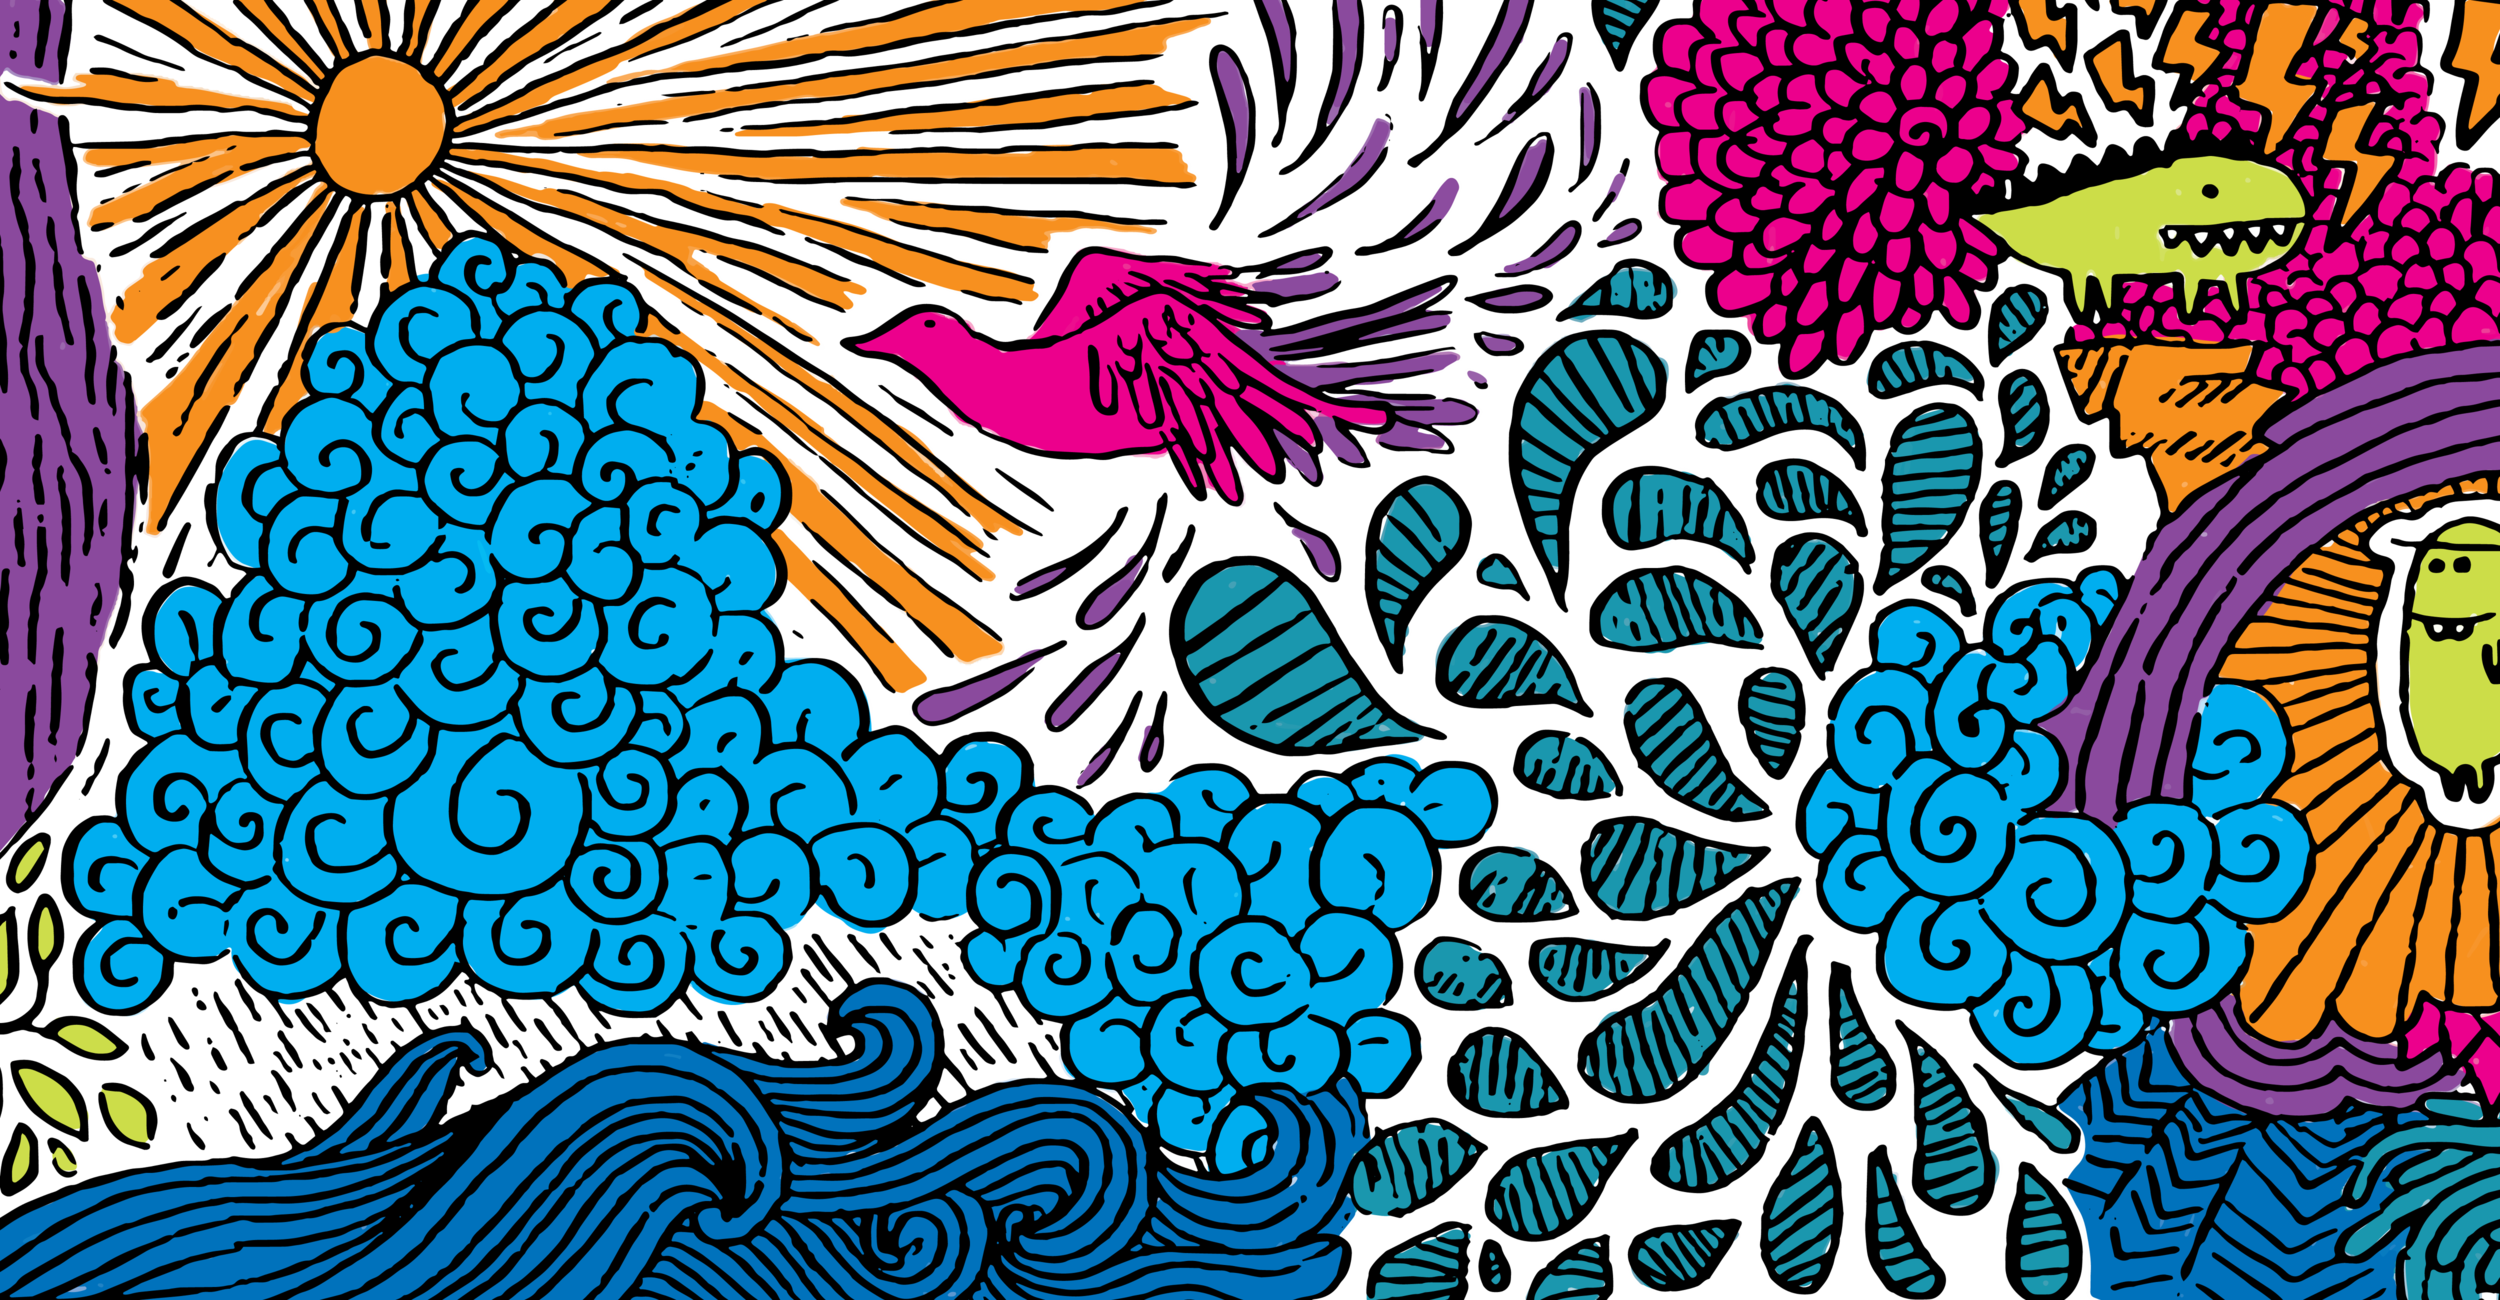 full_illo_vector_crop1_5000.png